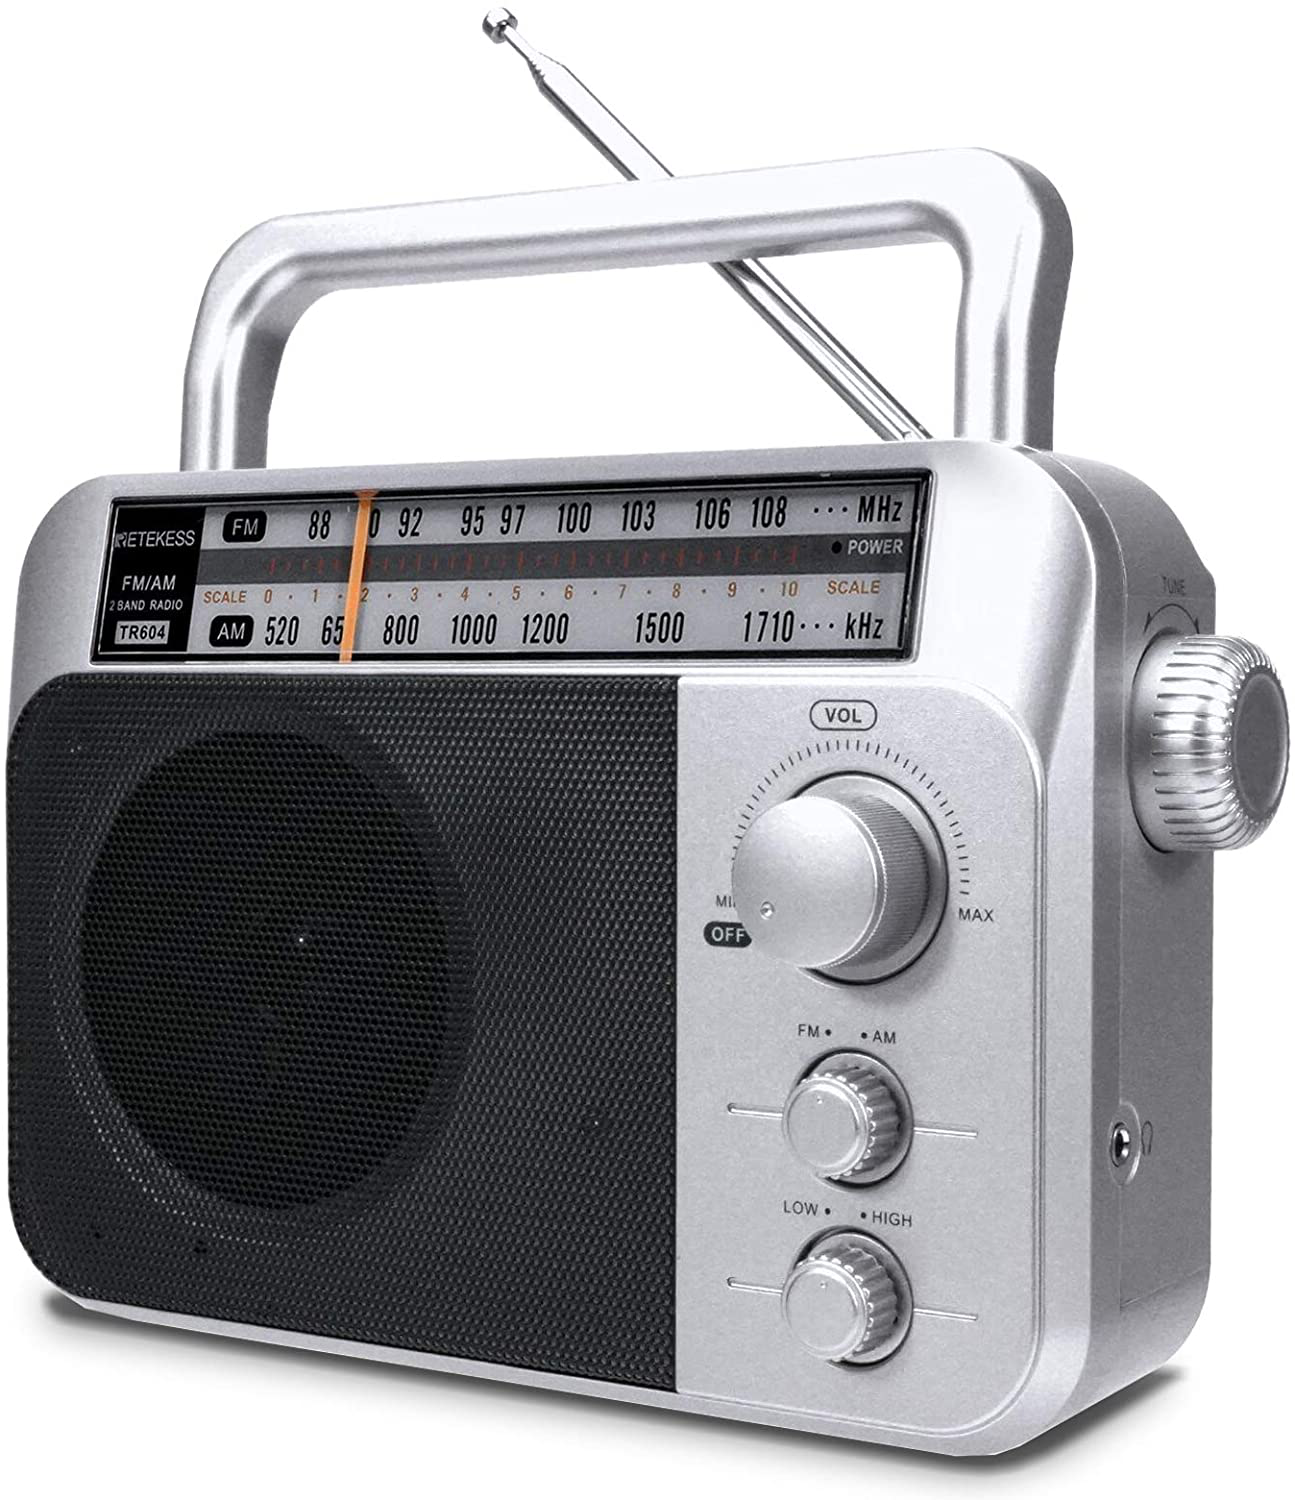 Retekess TR604 AM FM Radio, Portable Radios with Best Reception, AC or D Battery Powered Analog Radio, with Clear Dial and Large Knob, for Home